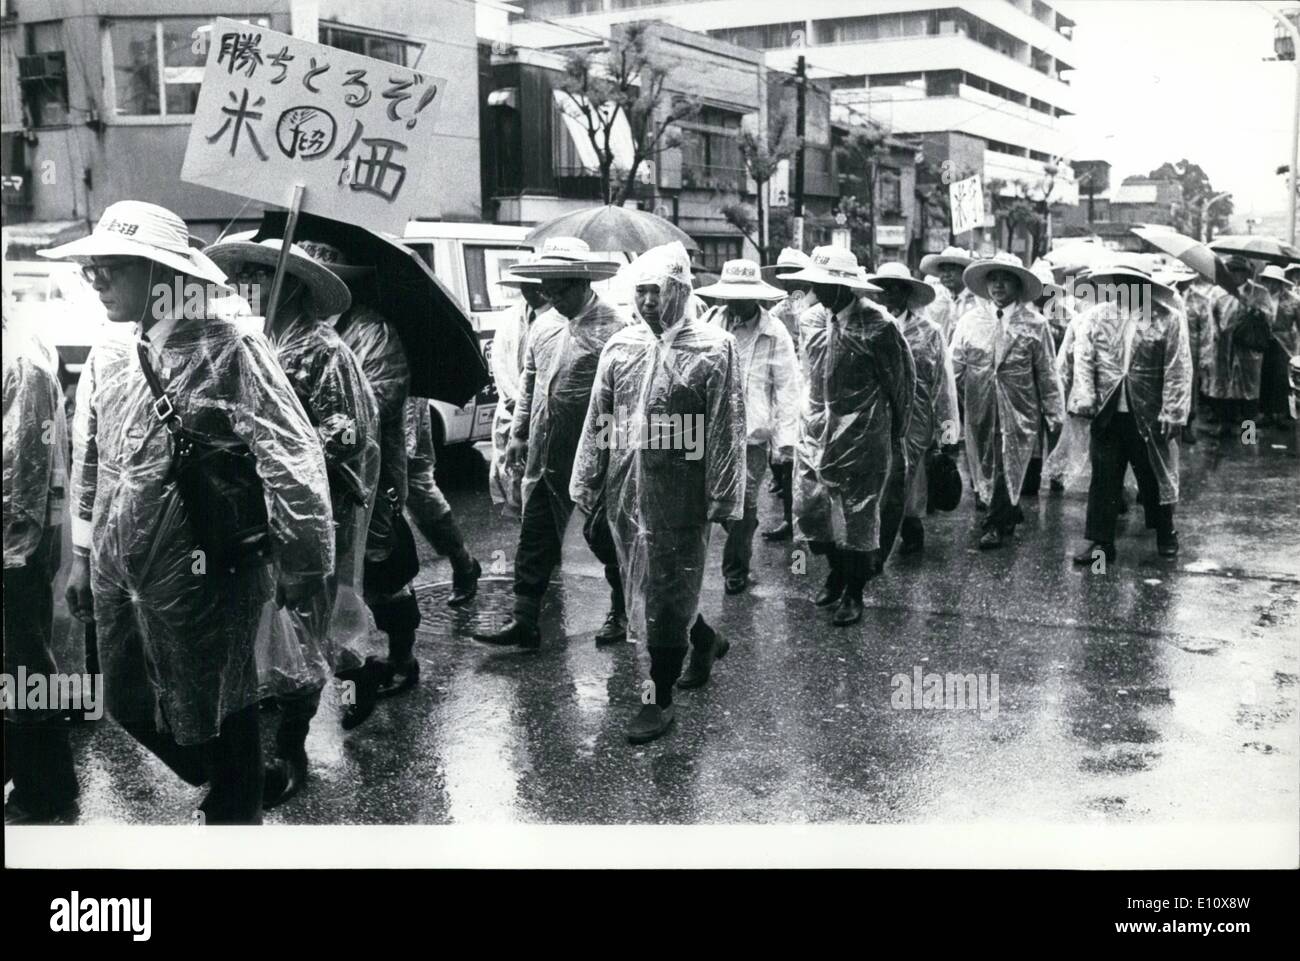 May 05, 1974 - JAPANESE FARMERS DEMAND HIGHER RICE PRICES IN TOKYO RALLY. Ignoring the rain, over 11,000 Japanese rice growers March through the streets of Tokyo to demand higher prices for their grain, and ''back pay'' to compensate for ''inadequacy'' of last year's price to cope with inflation. Among the demands is a 64,75 increase in producers rice price, and the ''back pay'' is to compensate them for last year's government fixed rice price, which they claim did not meet the sharp rise in labour costs, agricultural, materials, equipment, and daily necessities sparked by the oil crisis Stock Photo